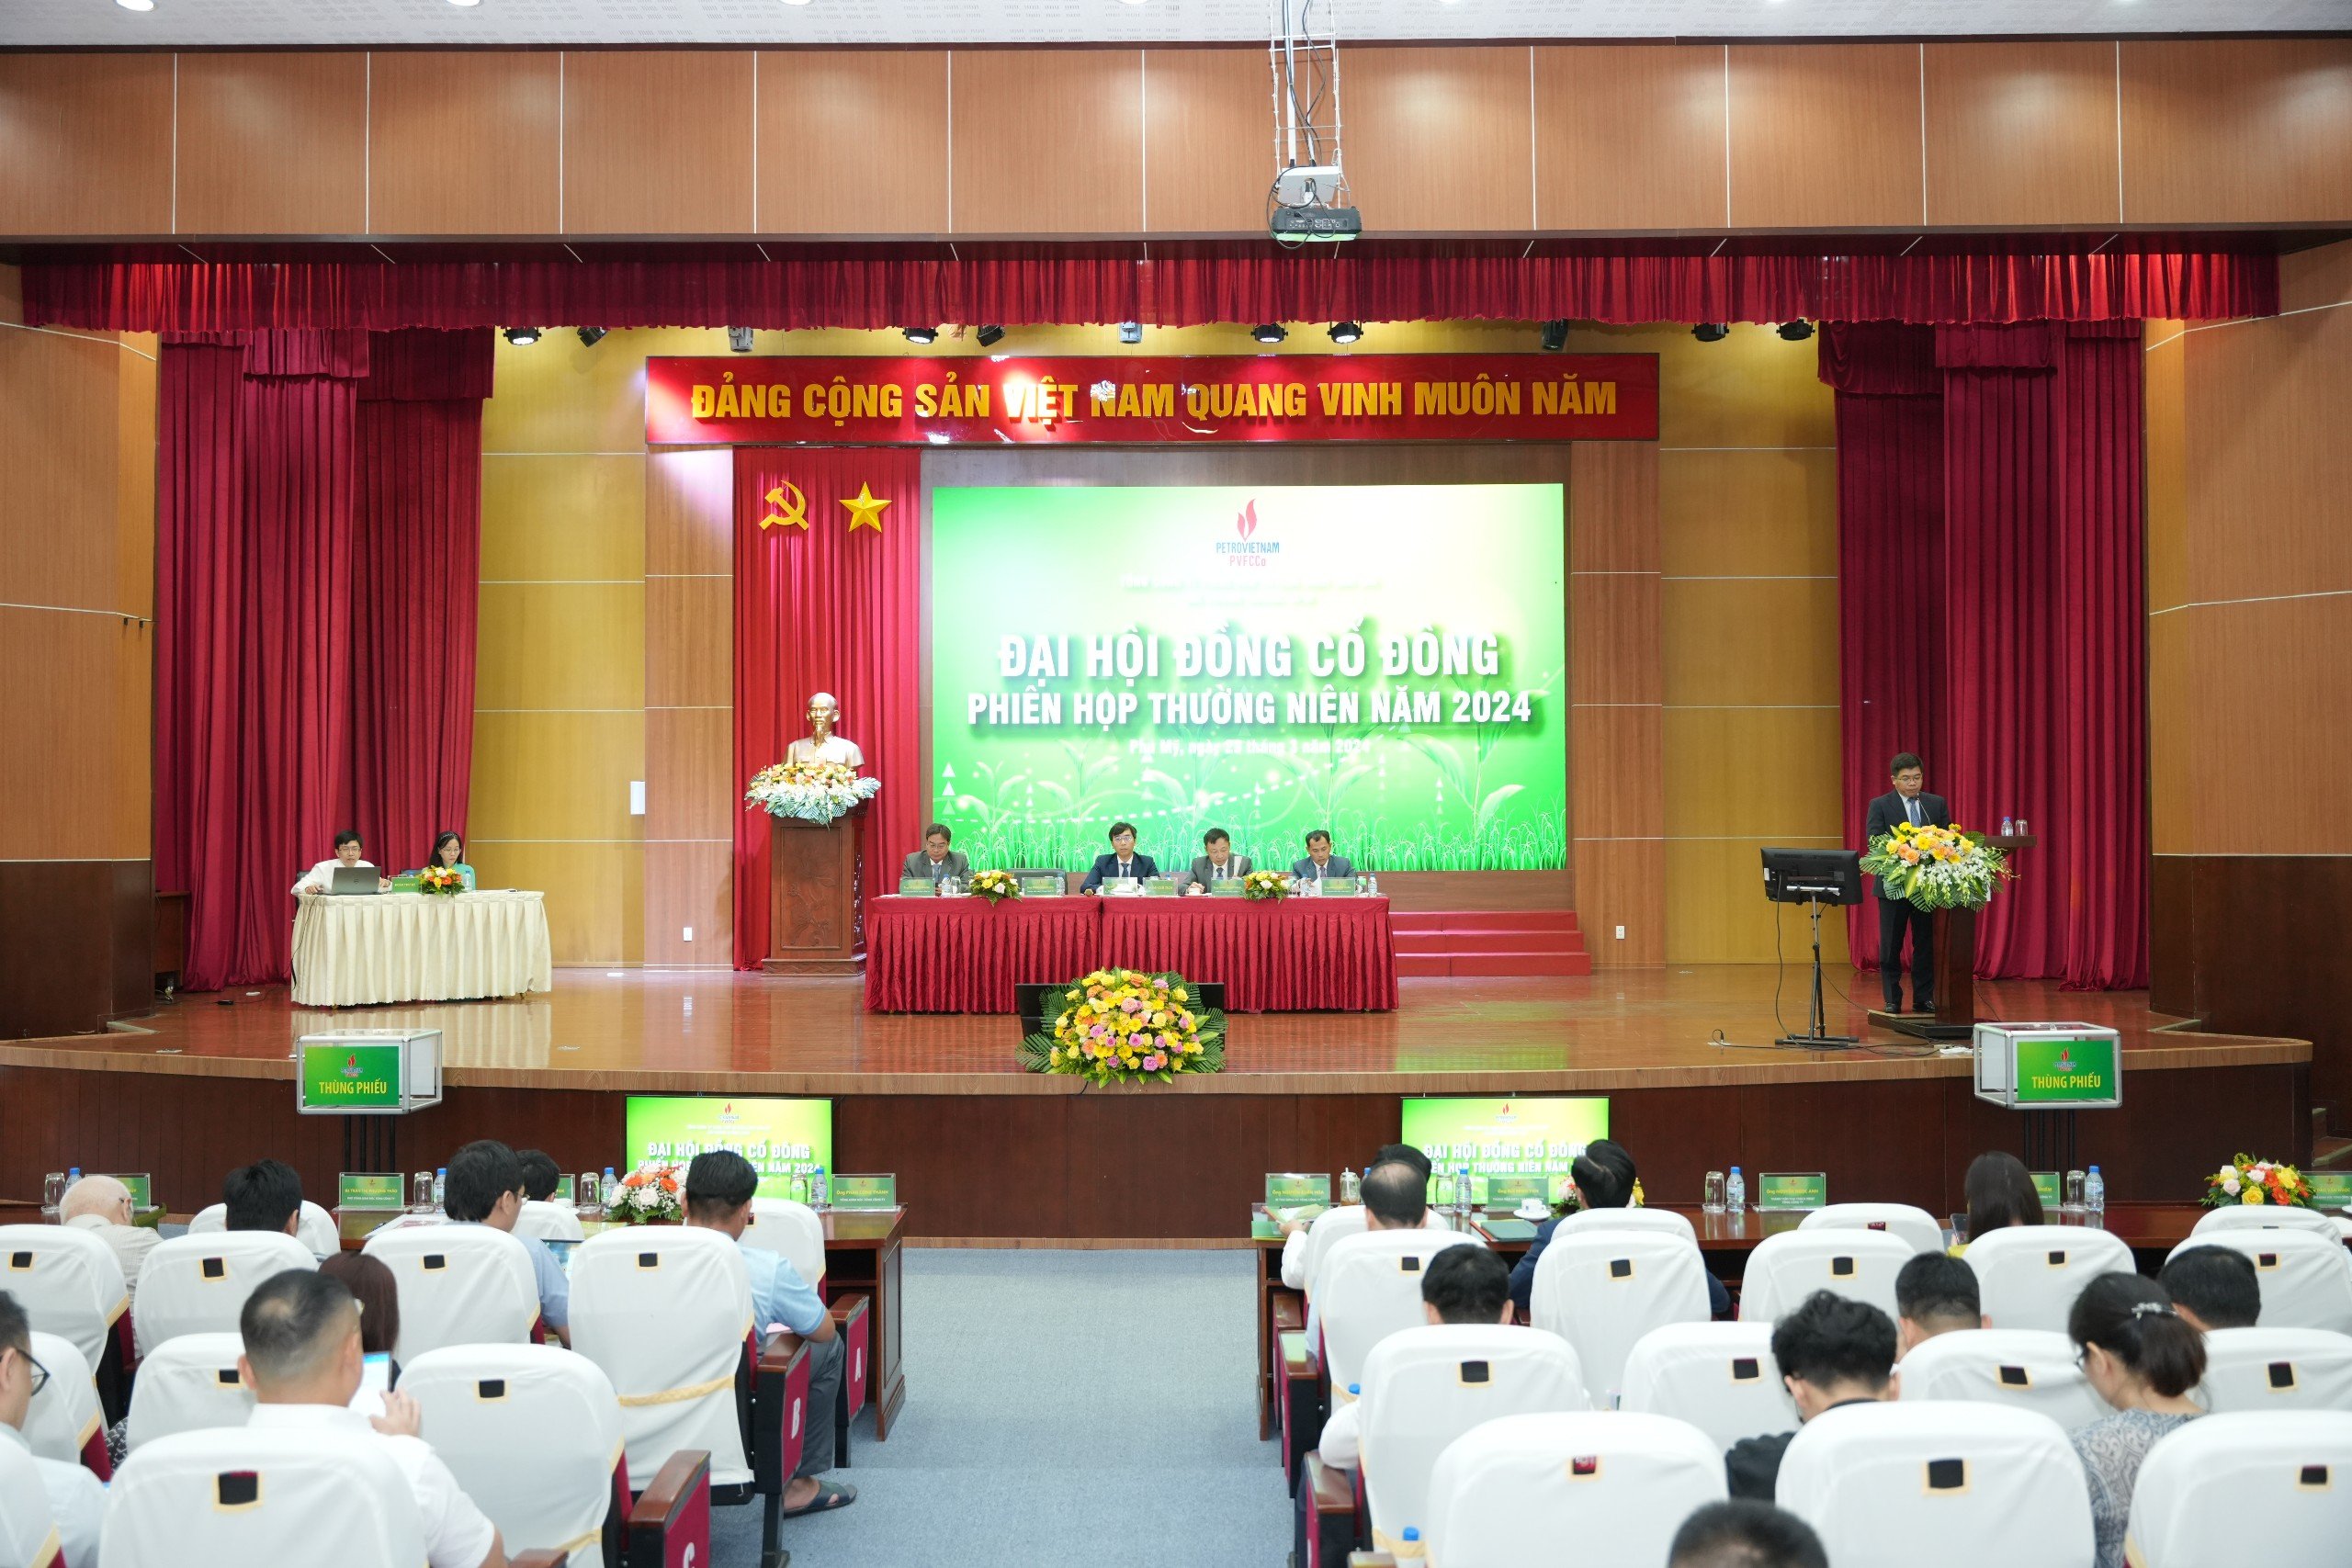 PVFCCo successfully held the Annual General Meeting of Shareholders in 2024.